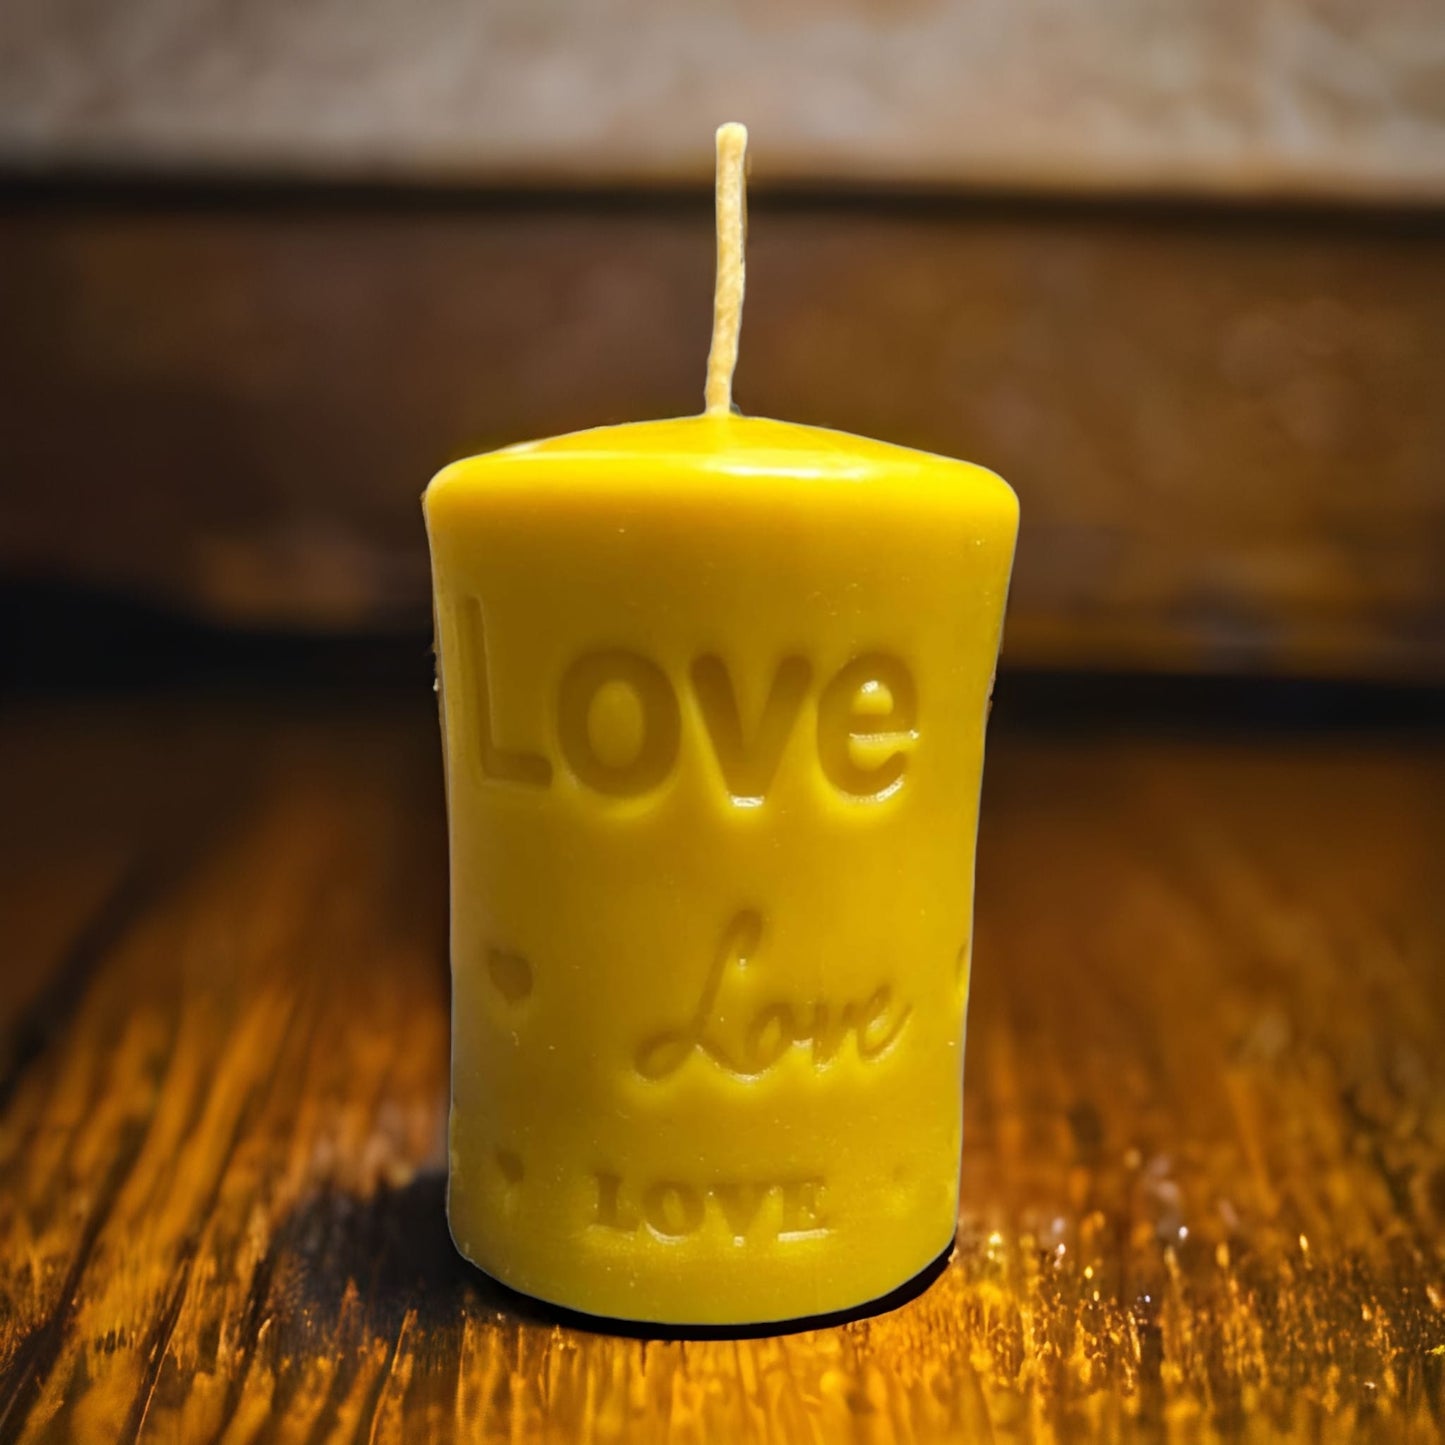 Pillar Candle with Love Inscription - Donagh Bees